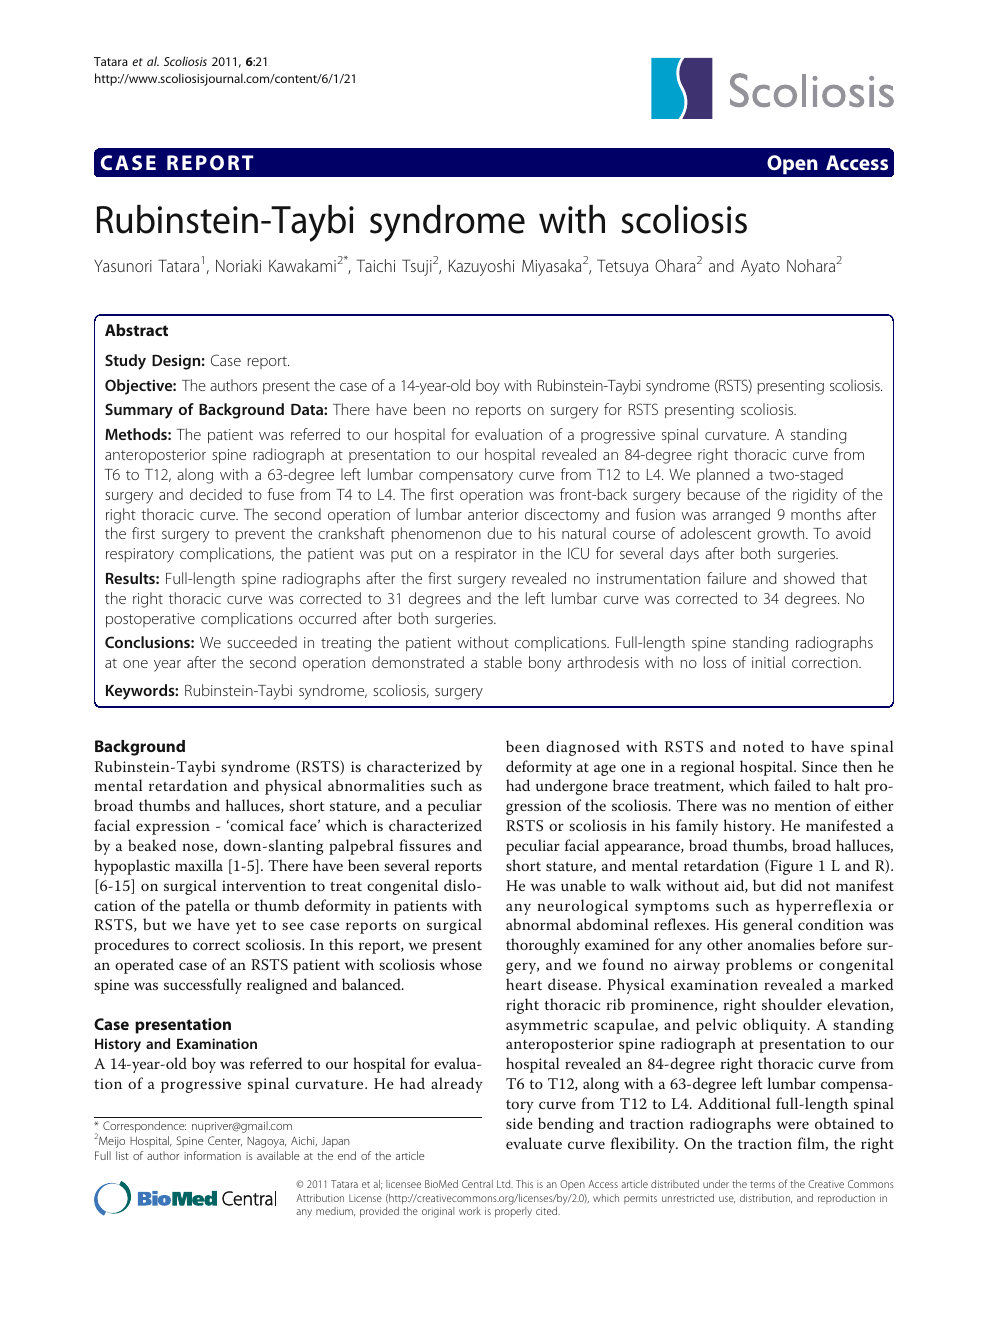 Rubinstein–Taybi syndrome: clinical and molecular overview